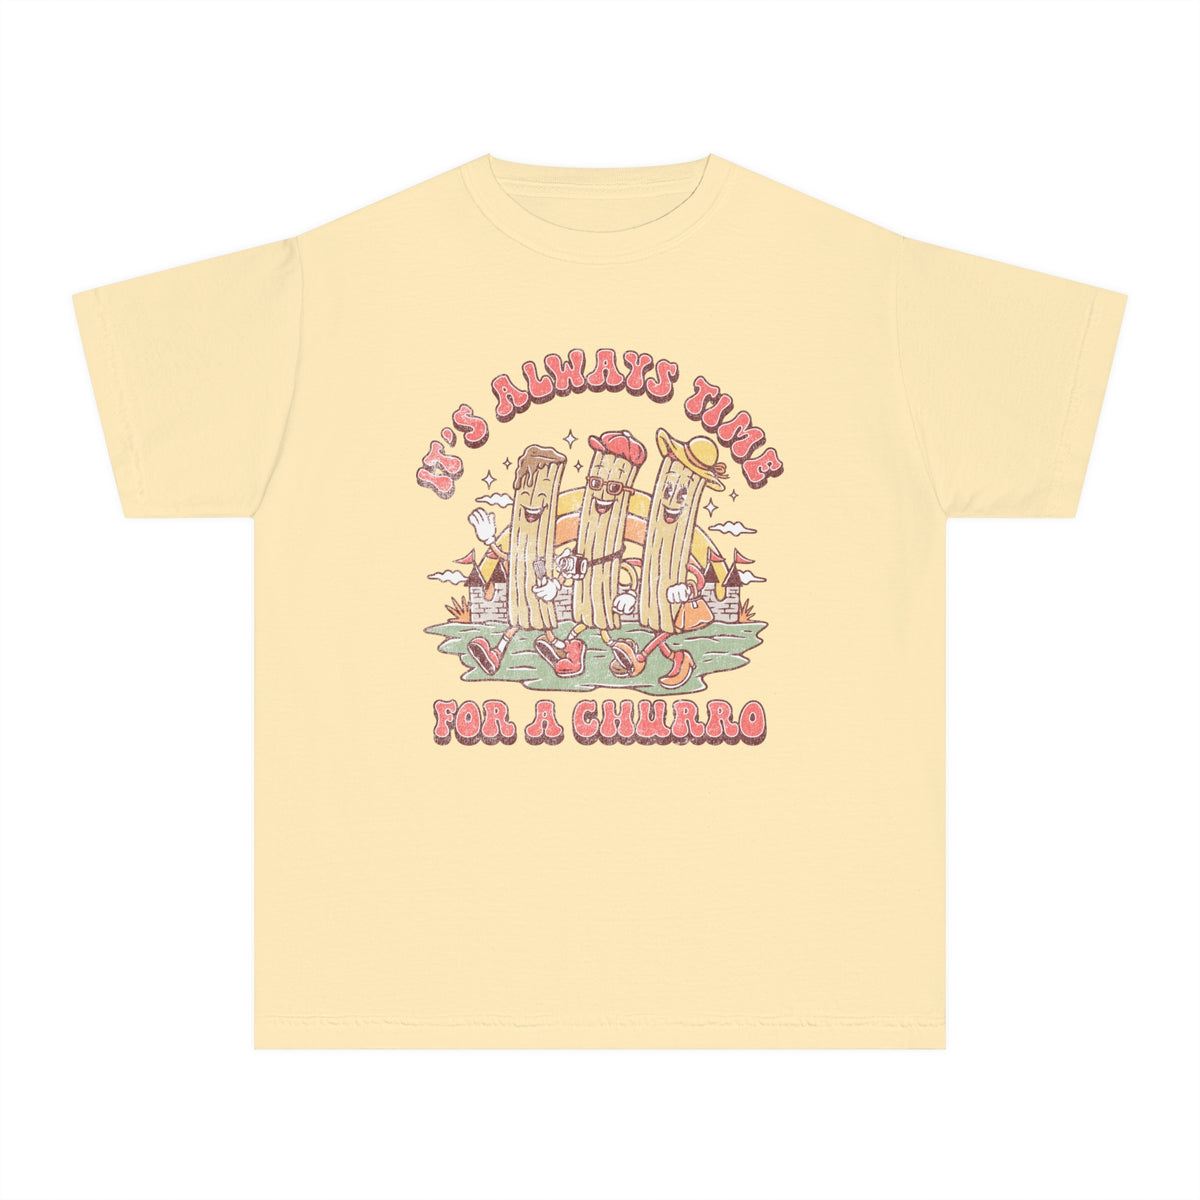 It's Always Time For A Churro Comfort Colors Youth Midweight Tee